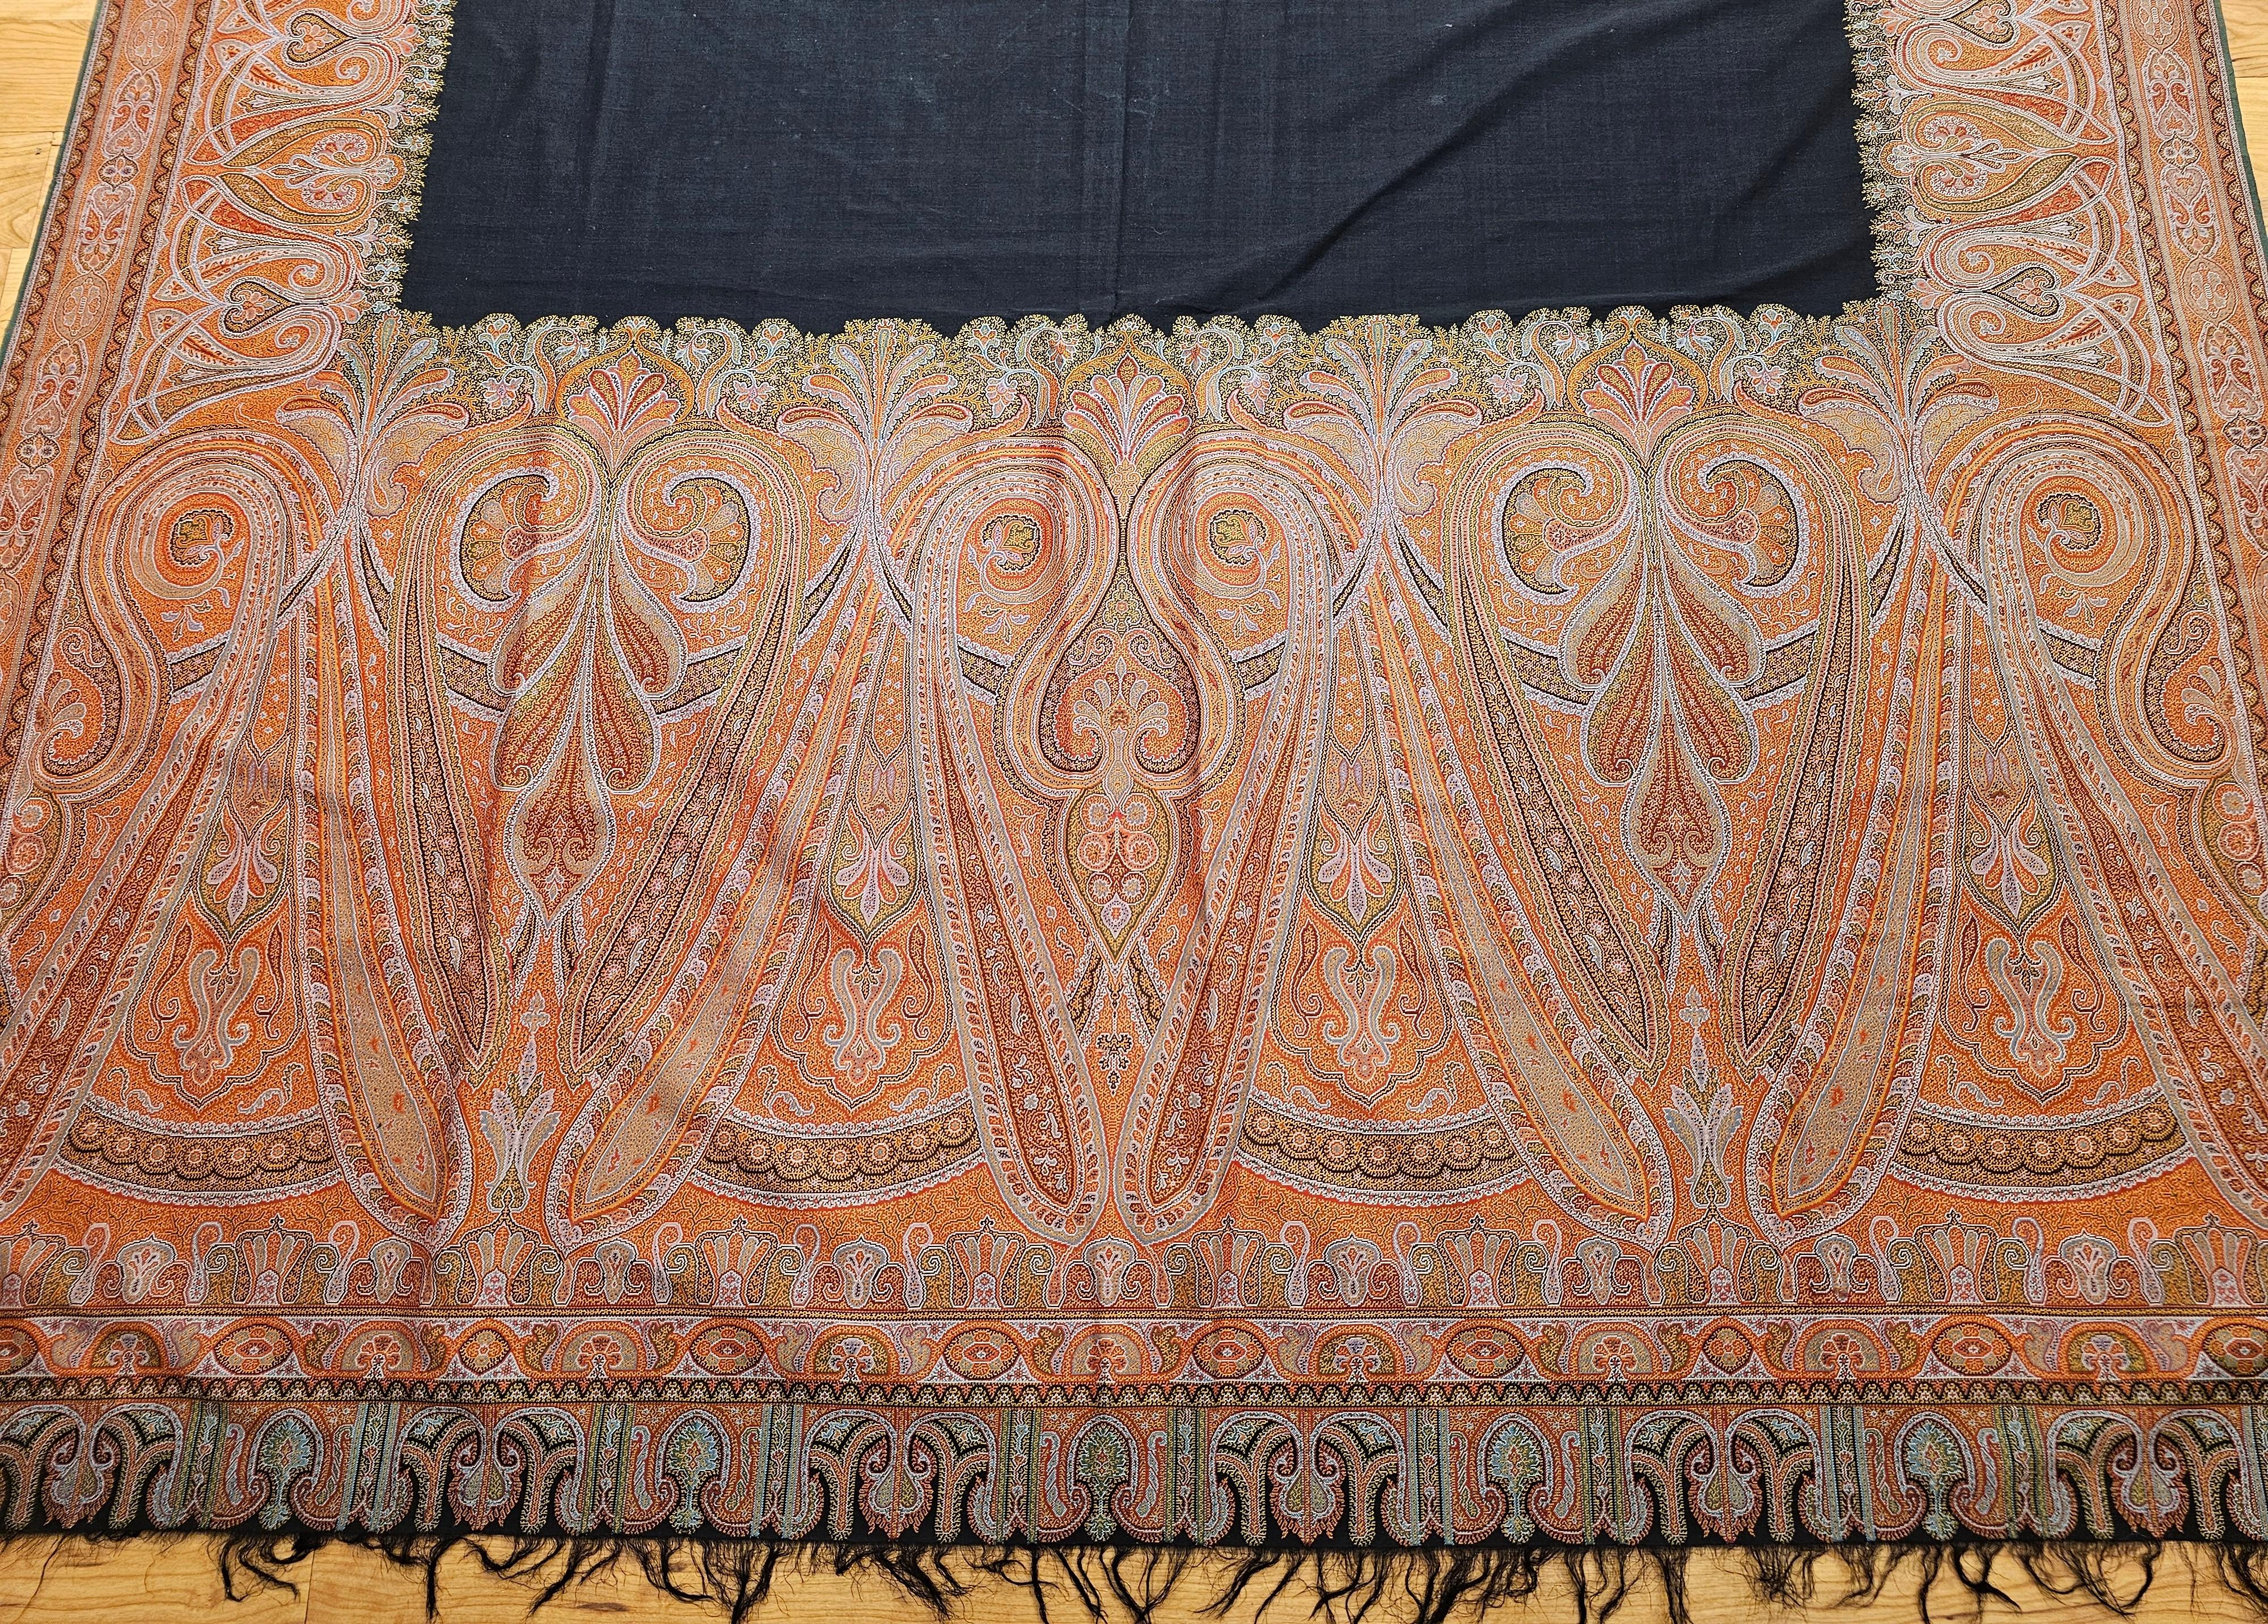 Indian 19th Century Hand-Woven Kashmiri Paisley Shawl in Brick Red, Black, Green For Sale